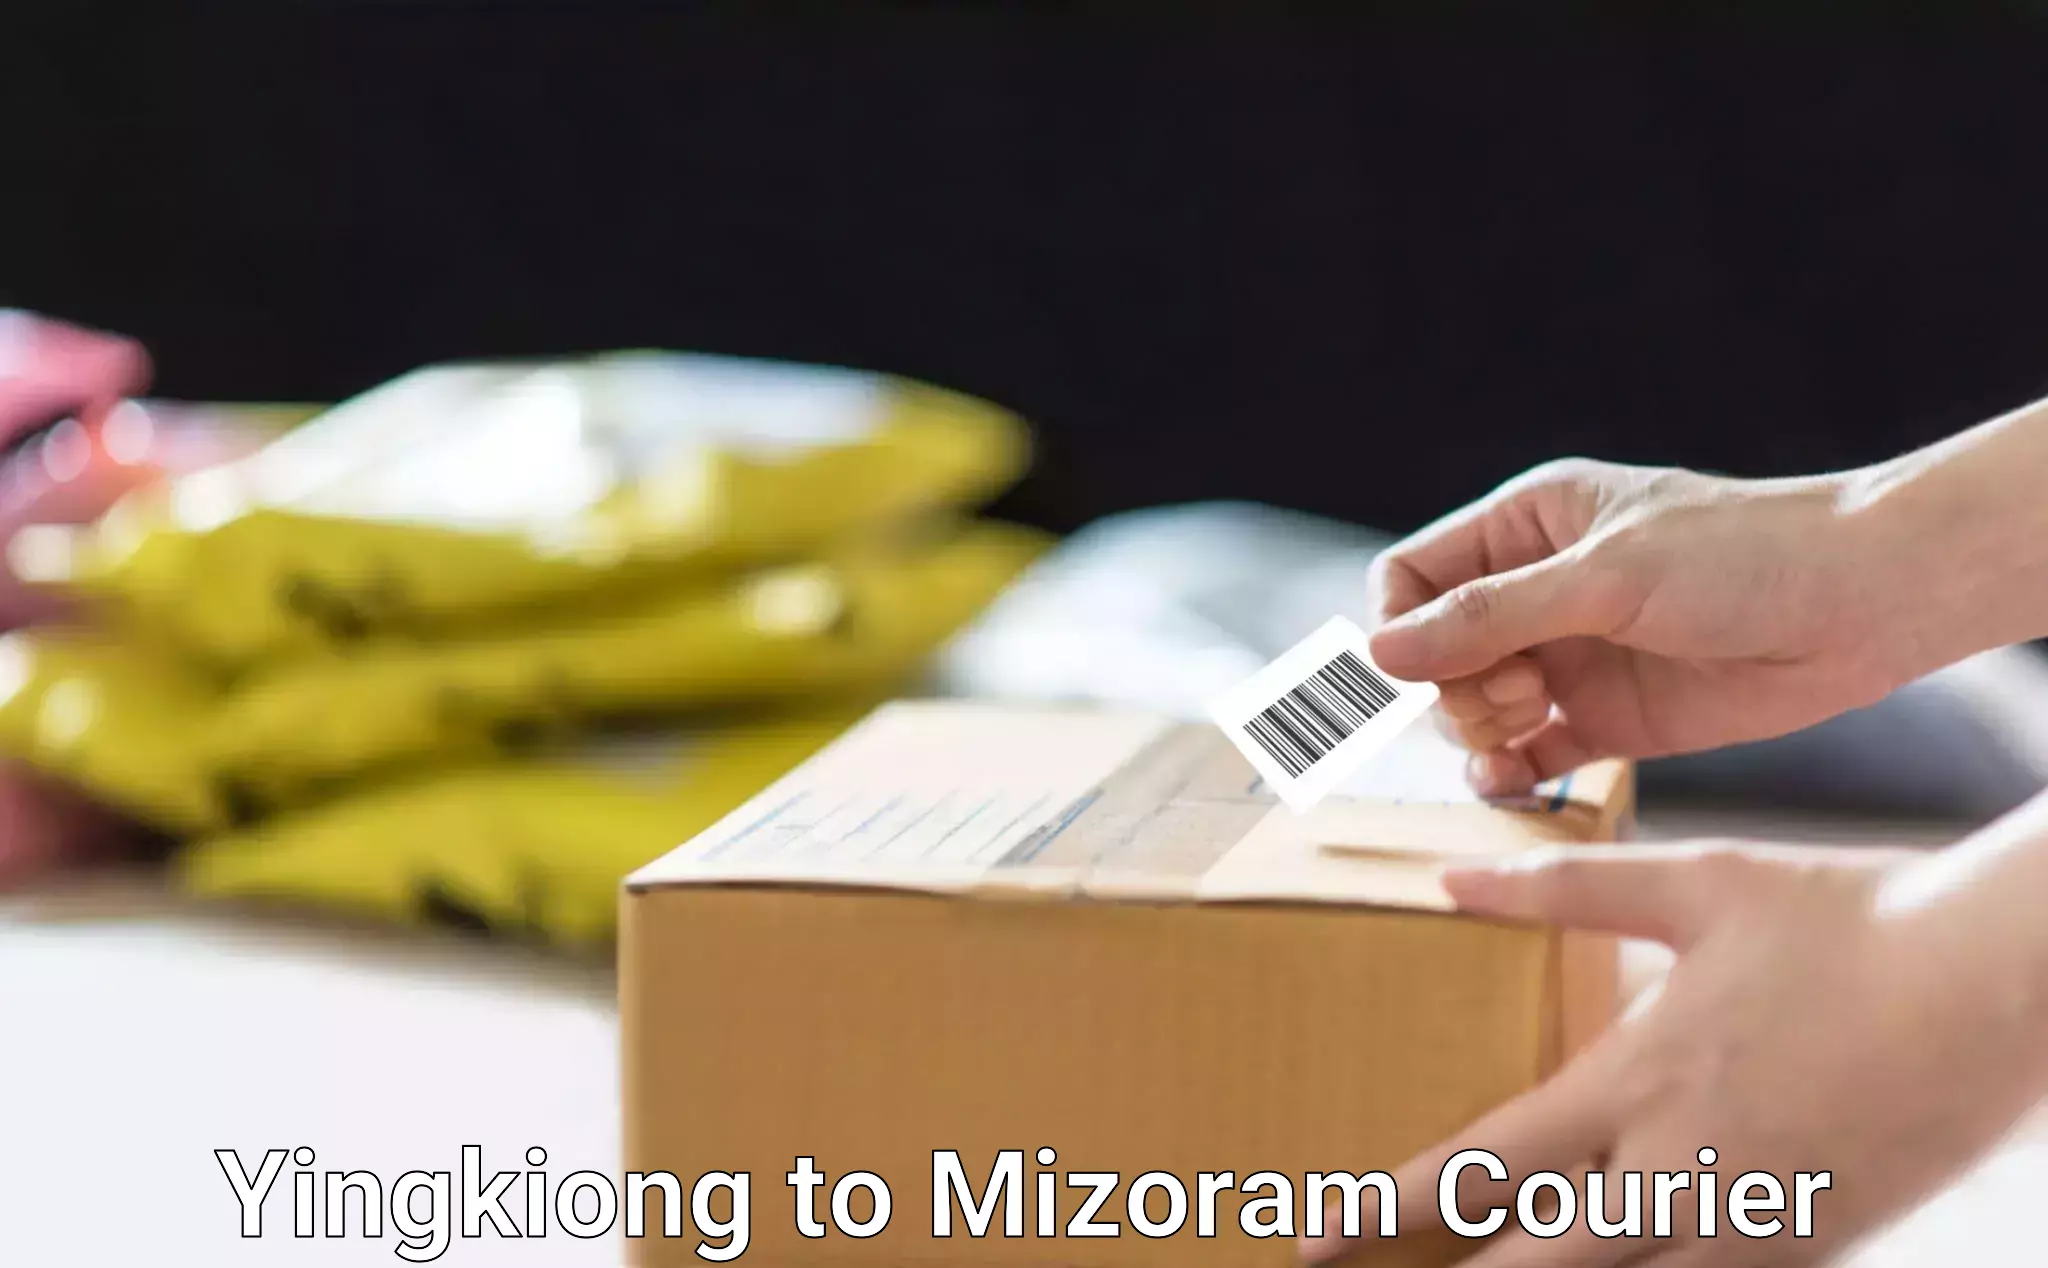 Express delivery solutions Yingkiong to Mizoram